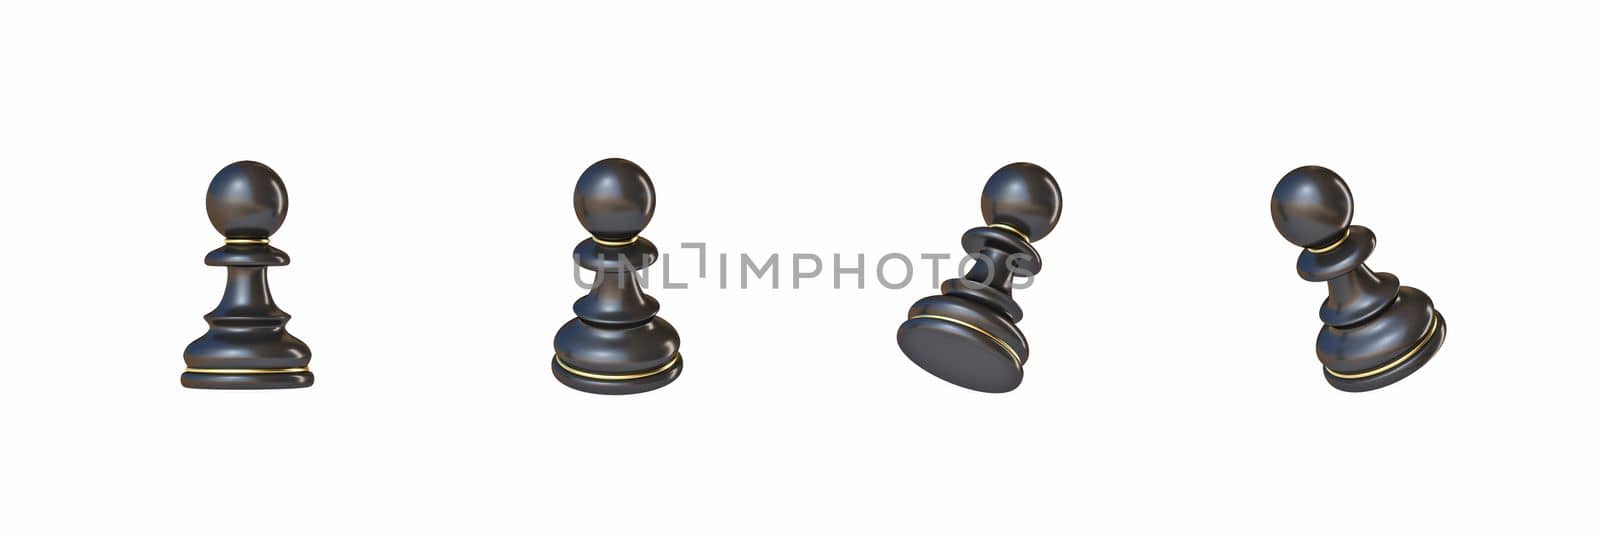 Black chess Pawn in four different angled views 3D rendering illustration isolated on white background